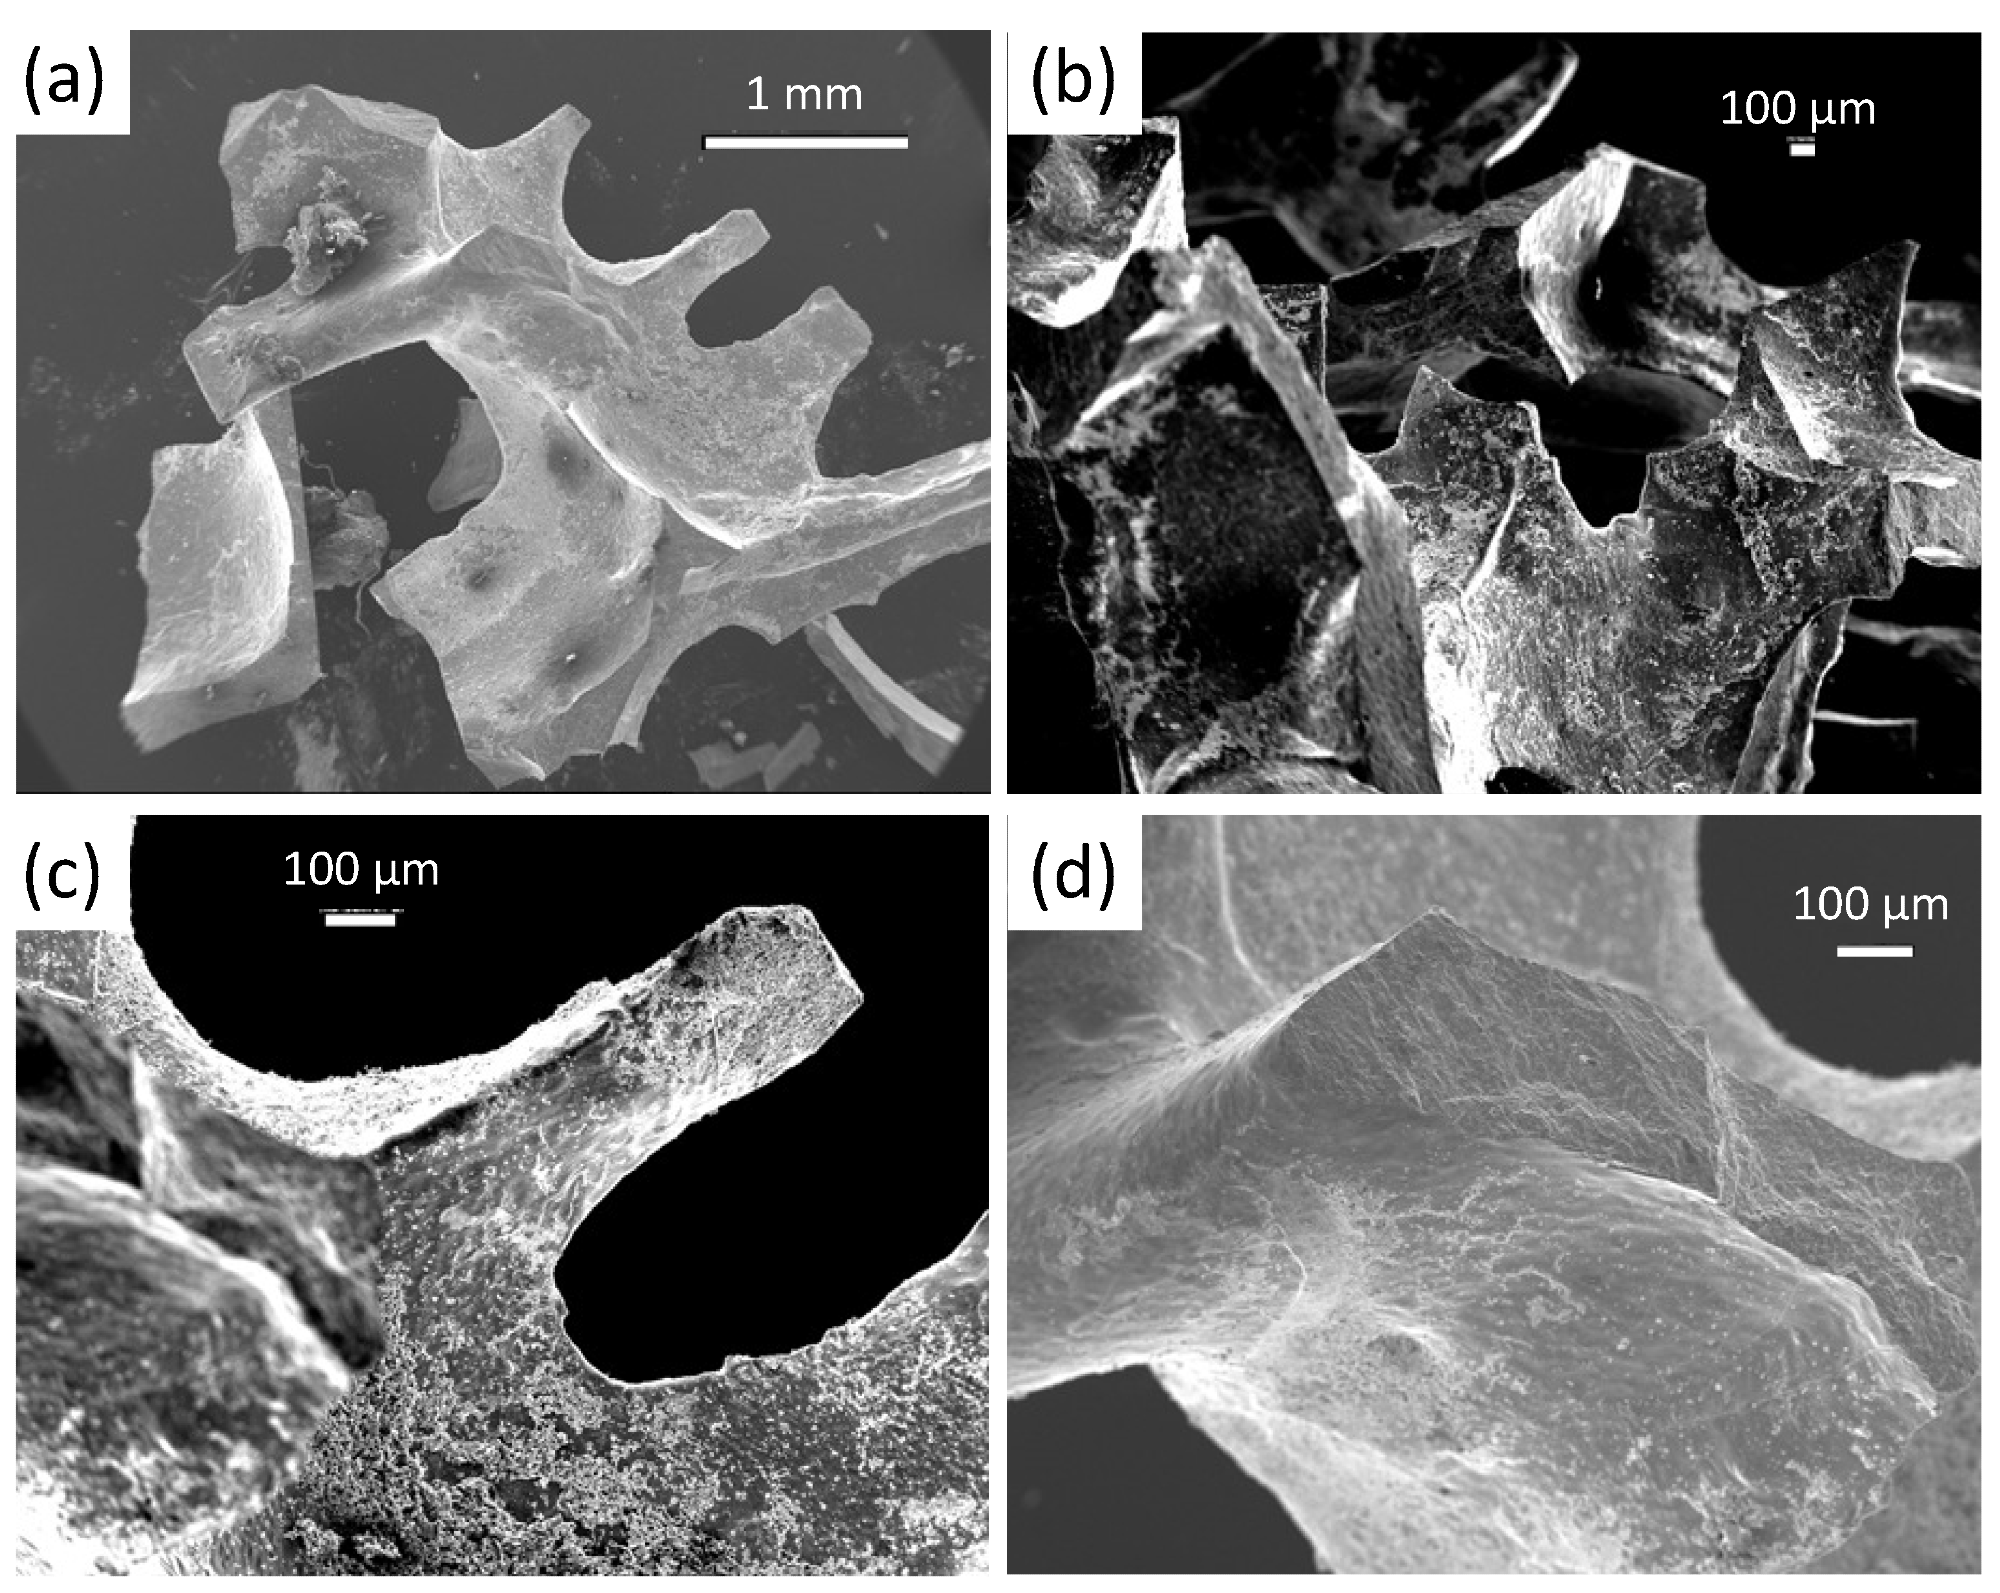 (a–d) SEM images at low magnification of broken-out foam strut pieces from a superconducting YBCO foam (magnification 25× (a), 35× (b), 85× (c) and 95× (d)), giving information of the real foam microstructure and the various internal surfaces existing in the open-cell foam structure. Note the rough character of the as-grown strut surfaces of the YBCO foam. The images further demonstrate the irregular shape and size distribution of the foam struts, which need to be modelled.